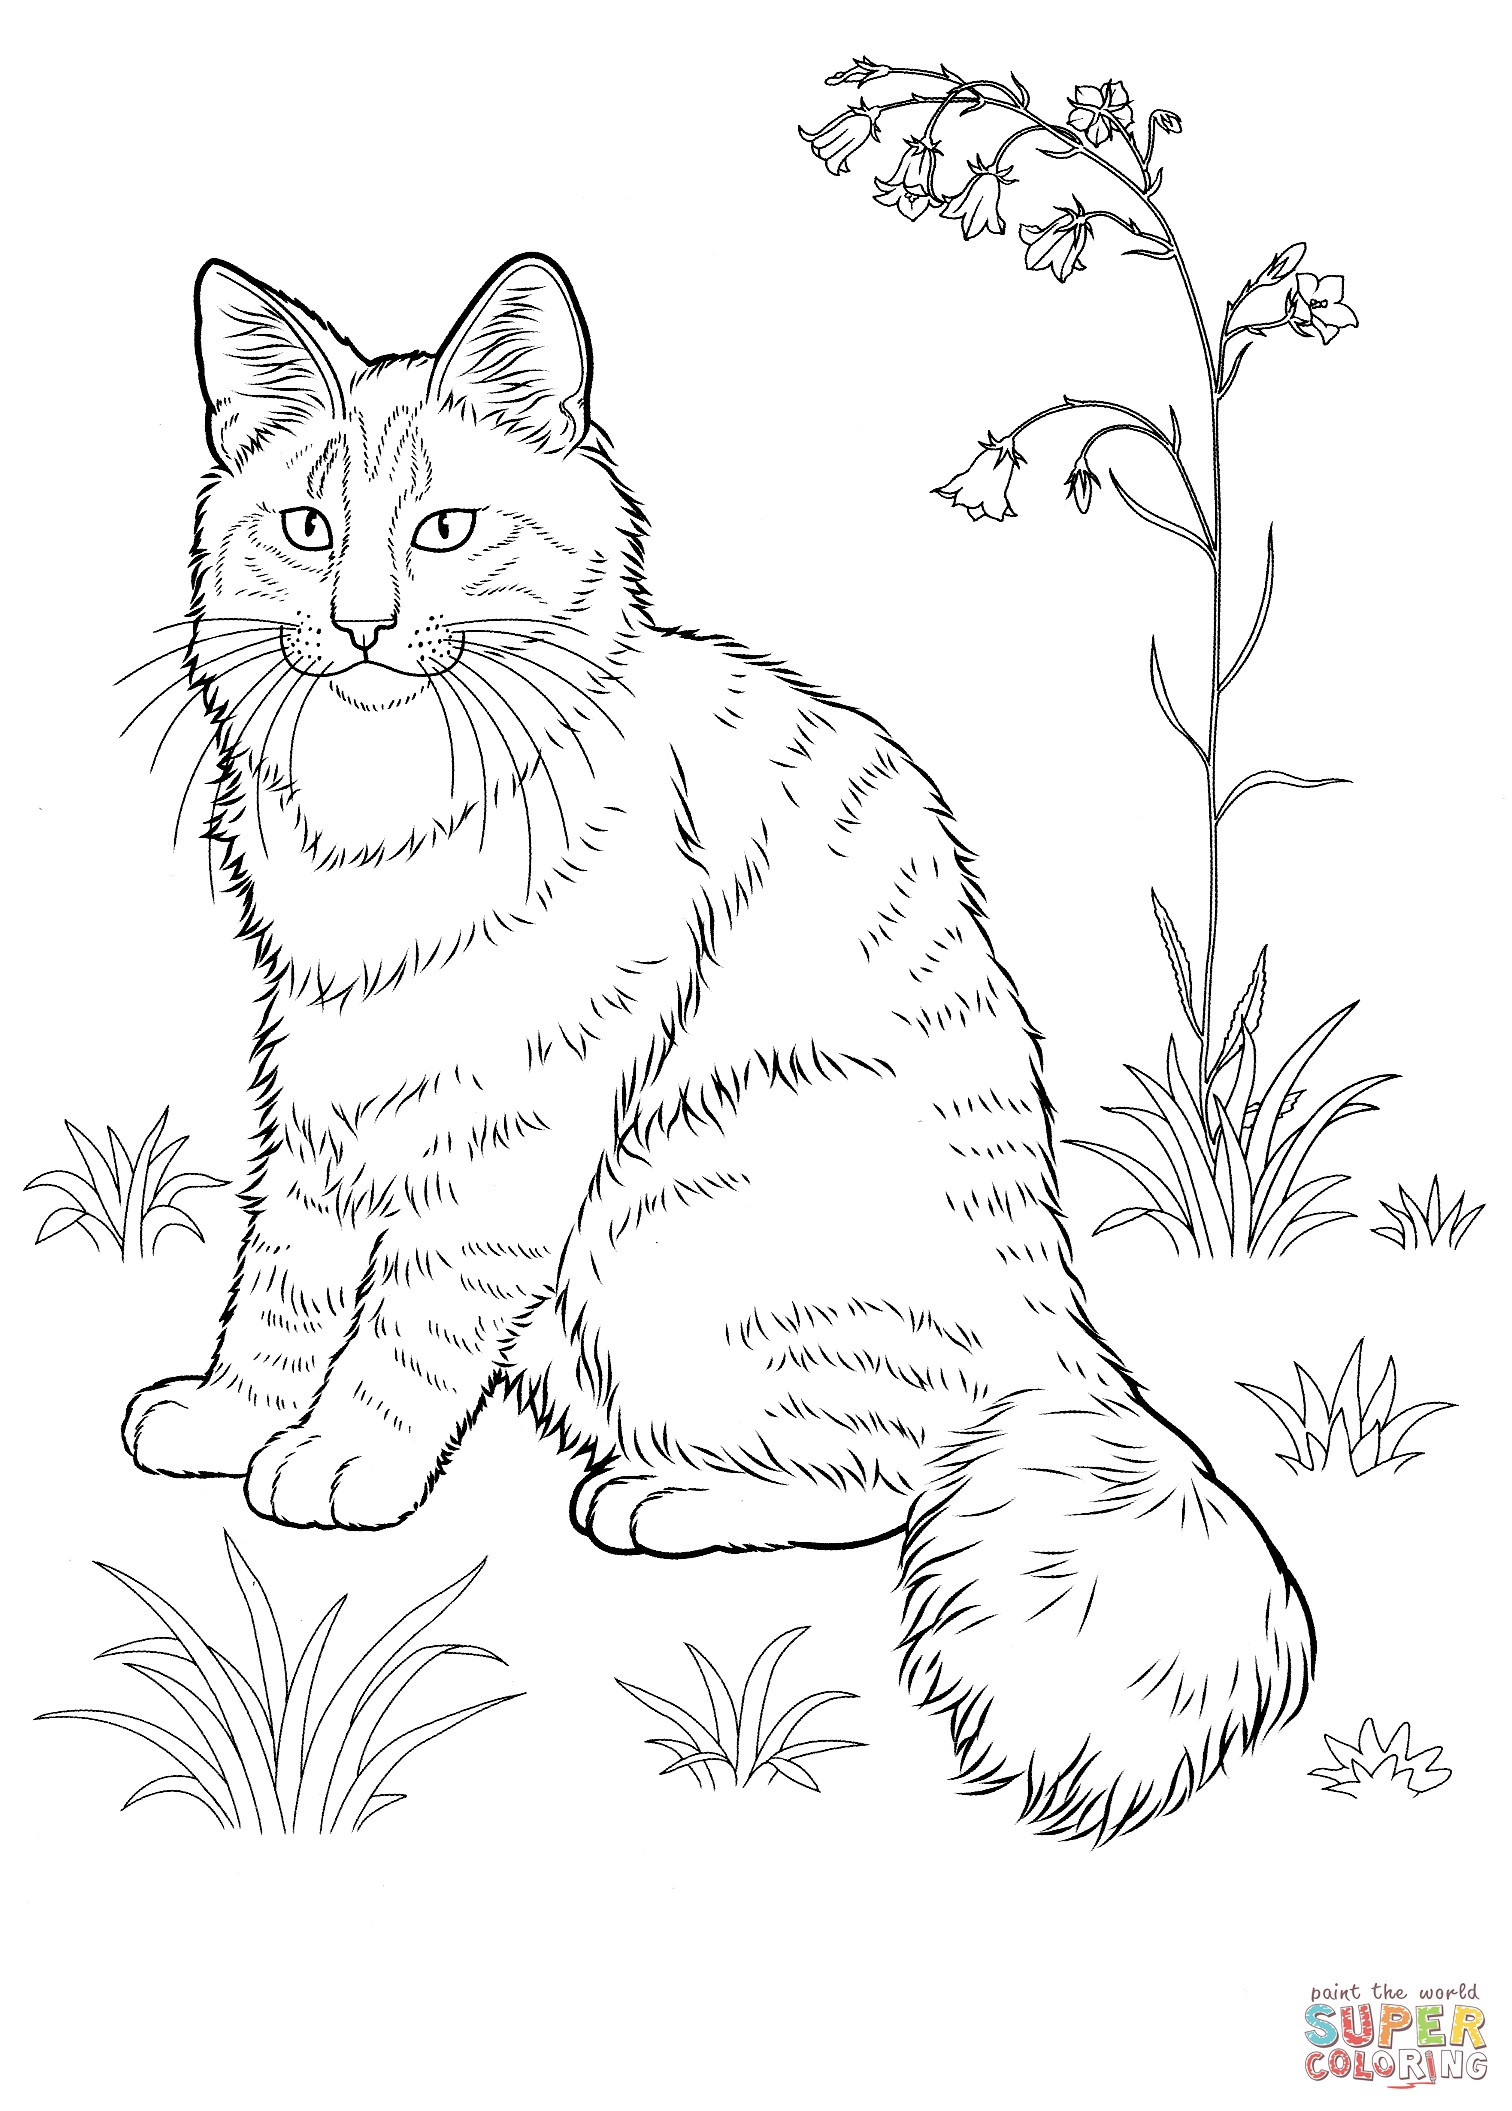 Realistic Cat Coloring Pages | BubaKids.com